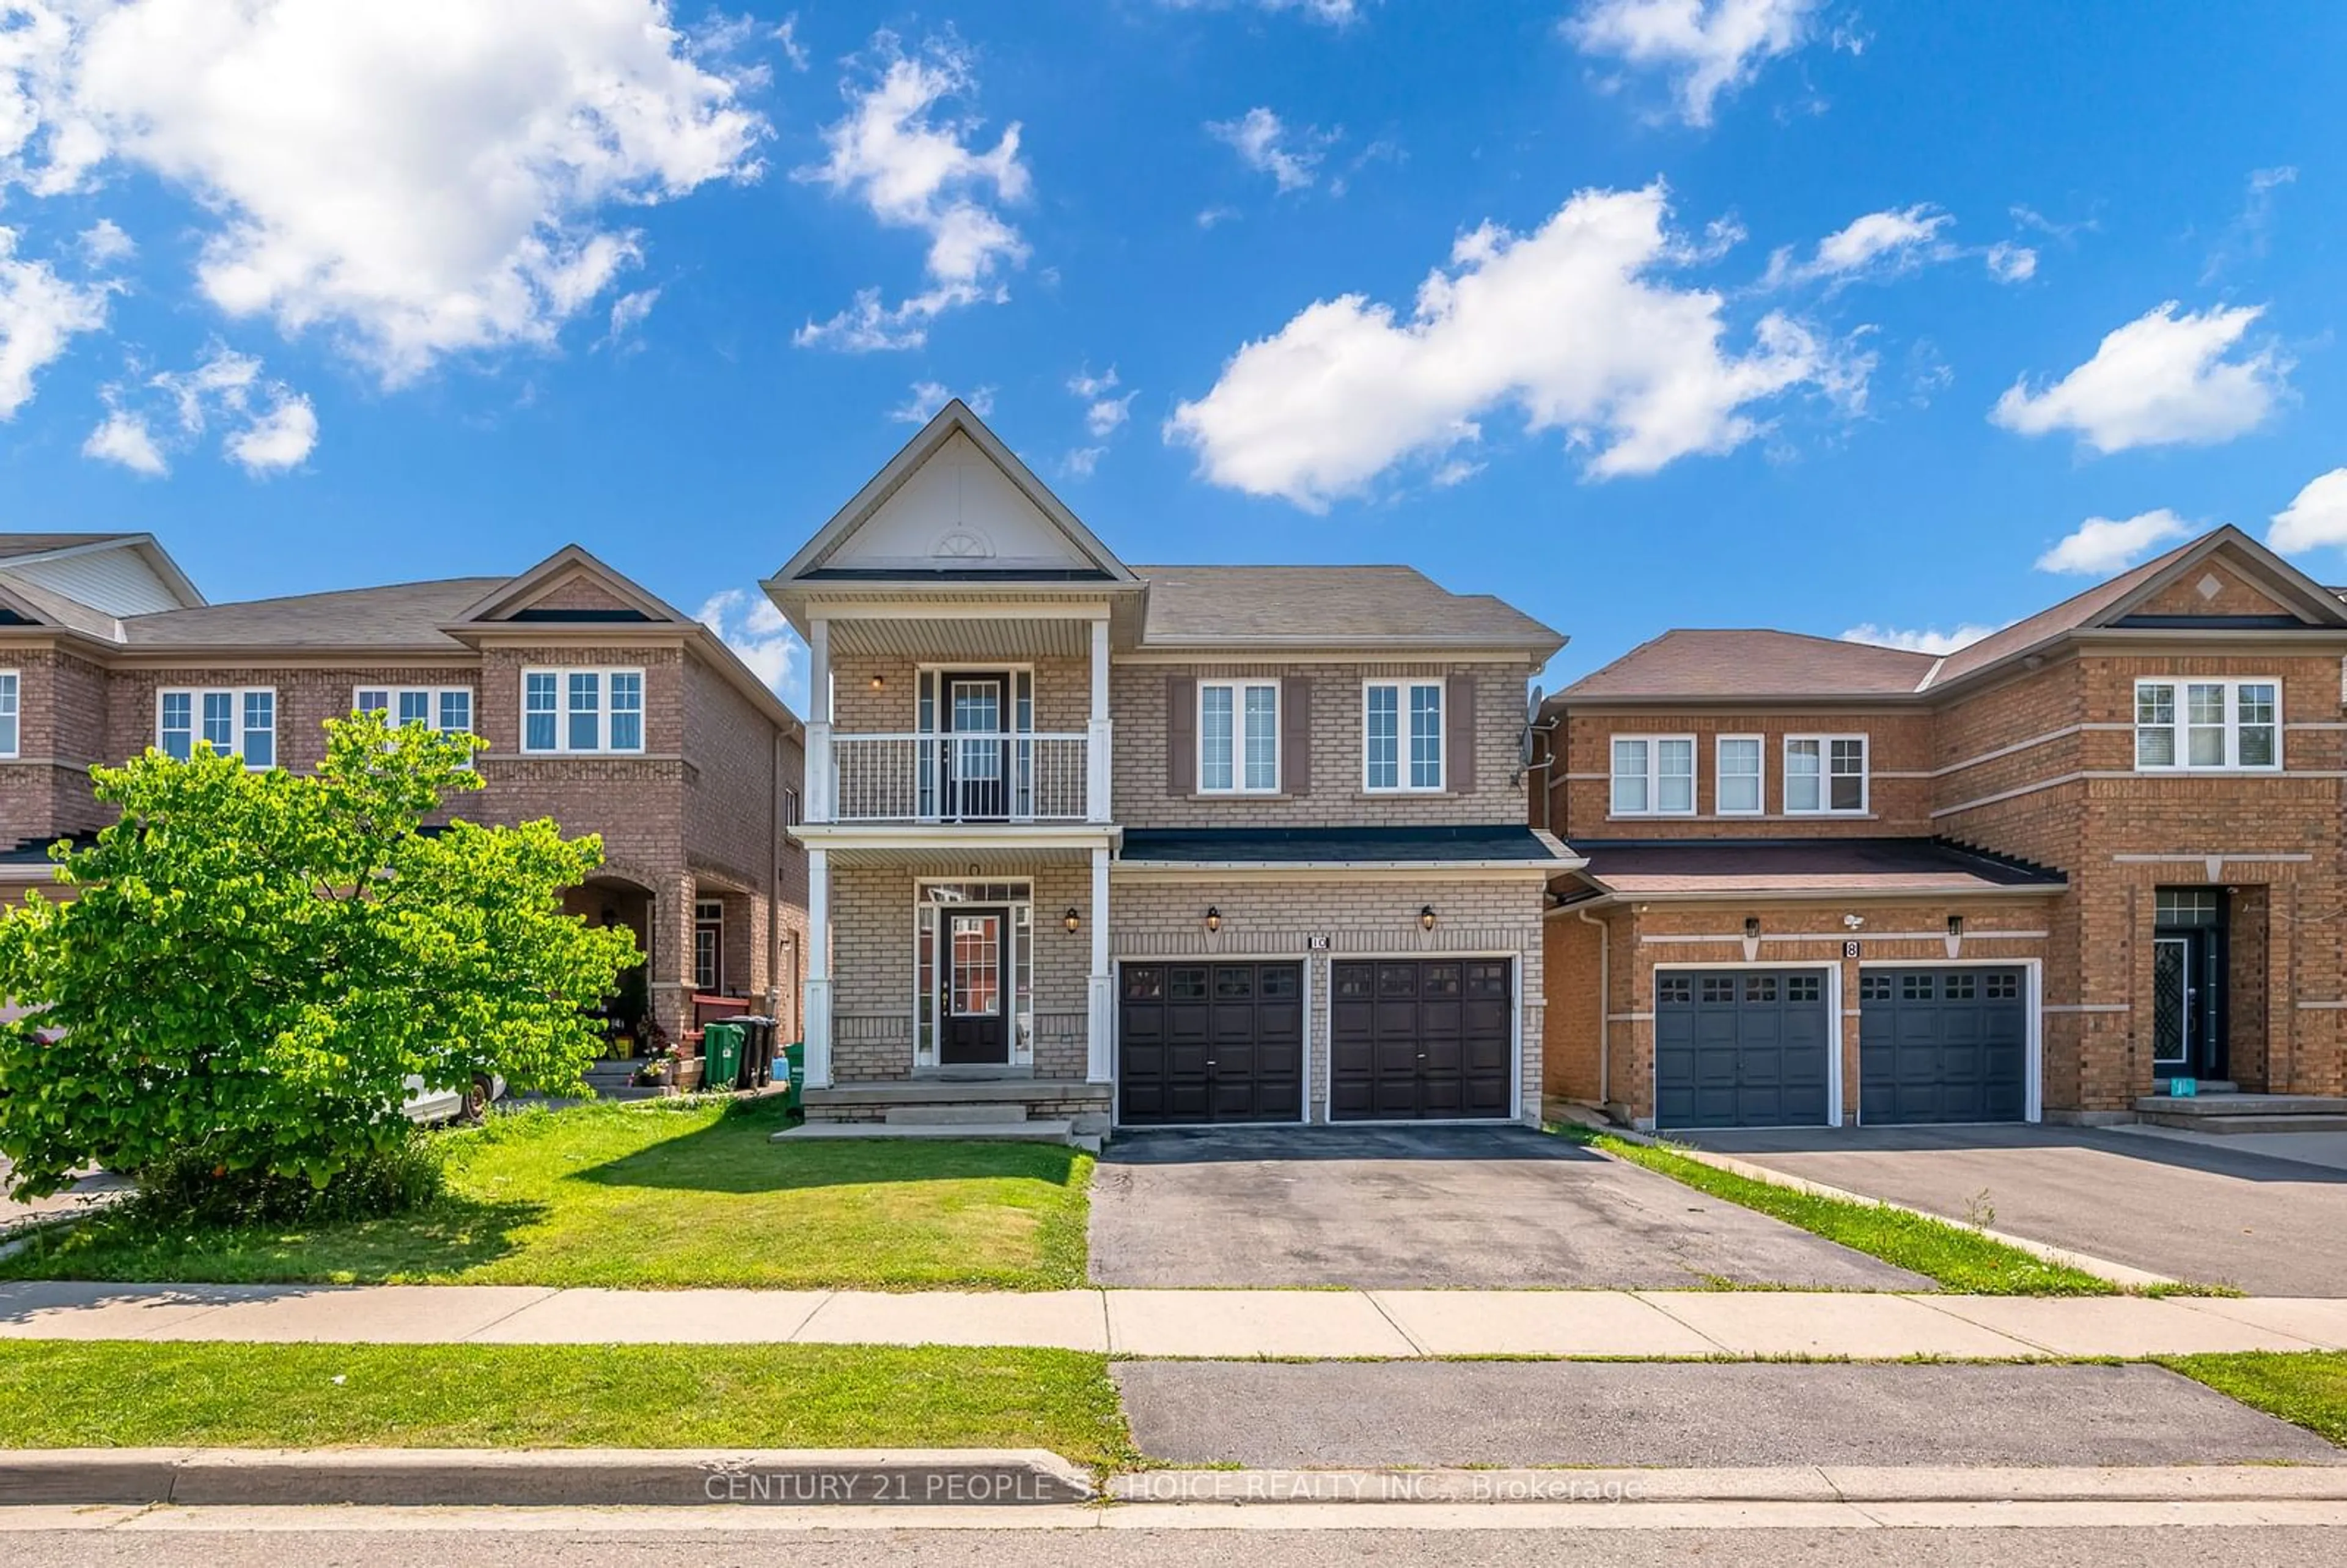 Home with brick exterior material for 10 Nathaniel Cres, Brampton Ontario L6Y 5M2